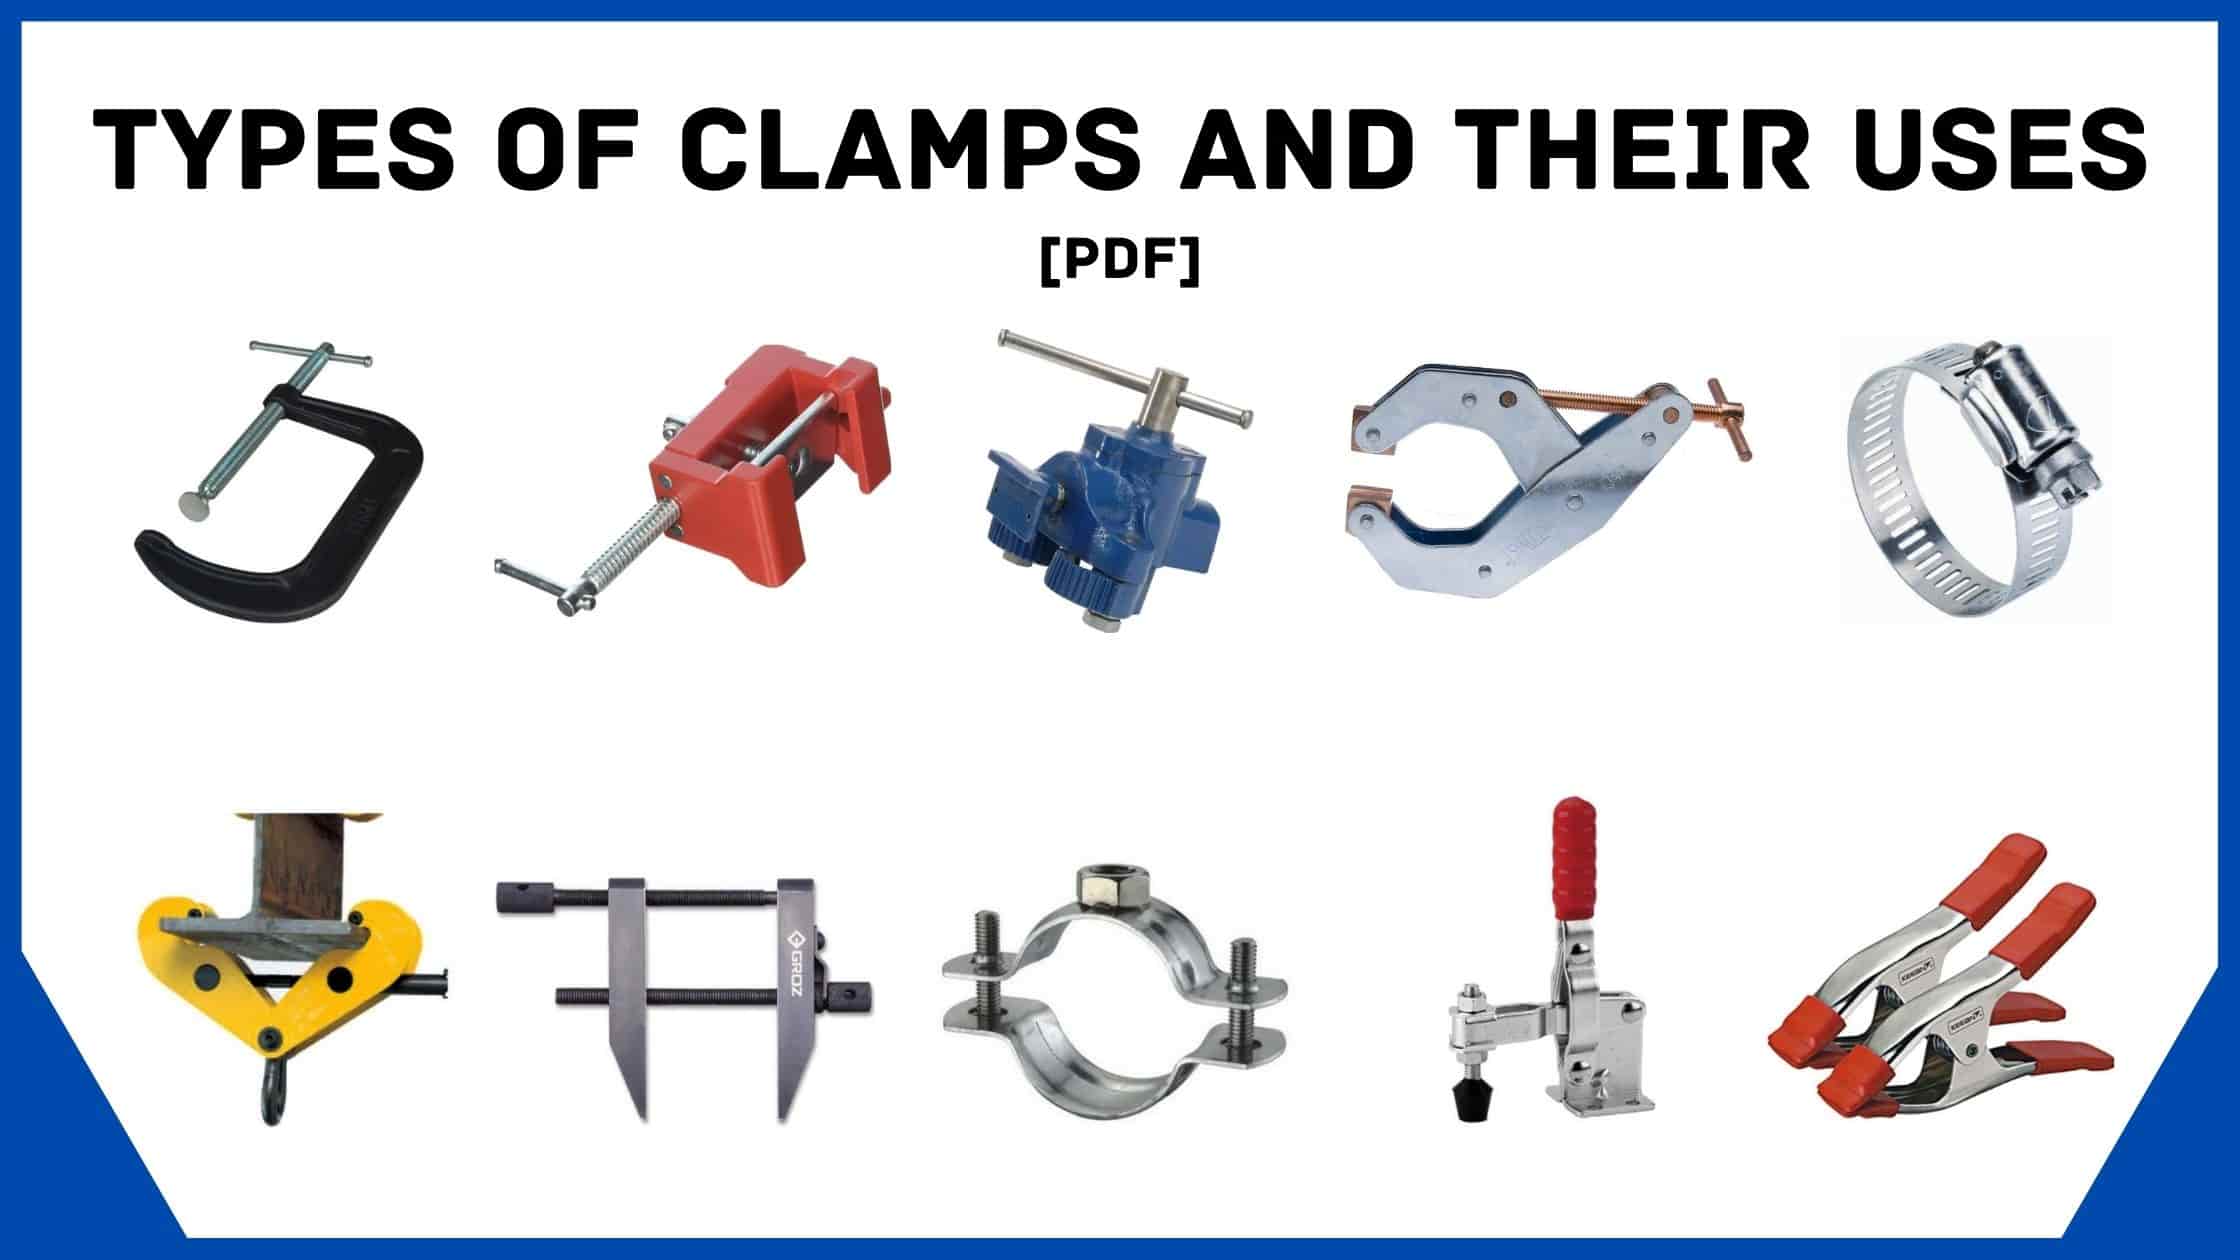 37 Types of Clamps & Their Uses [How To Use Guide] PDF